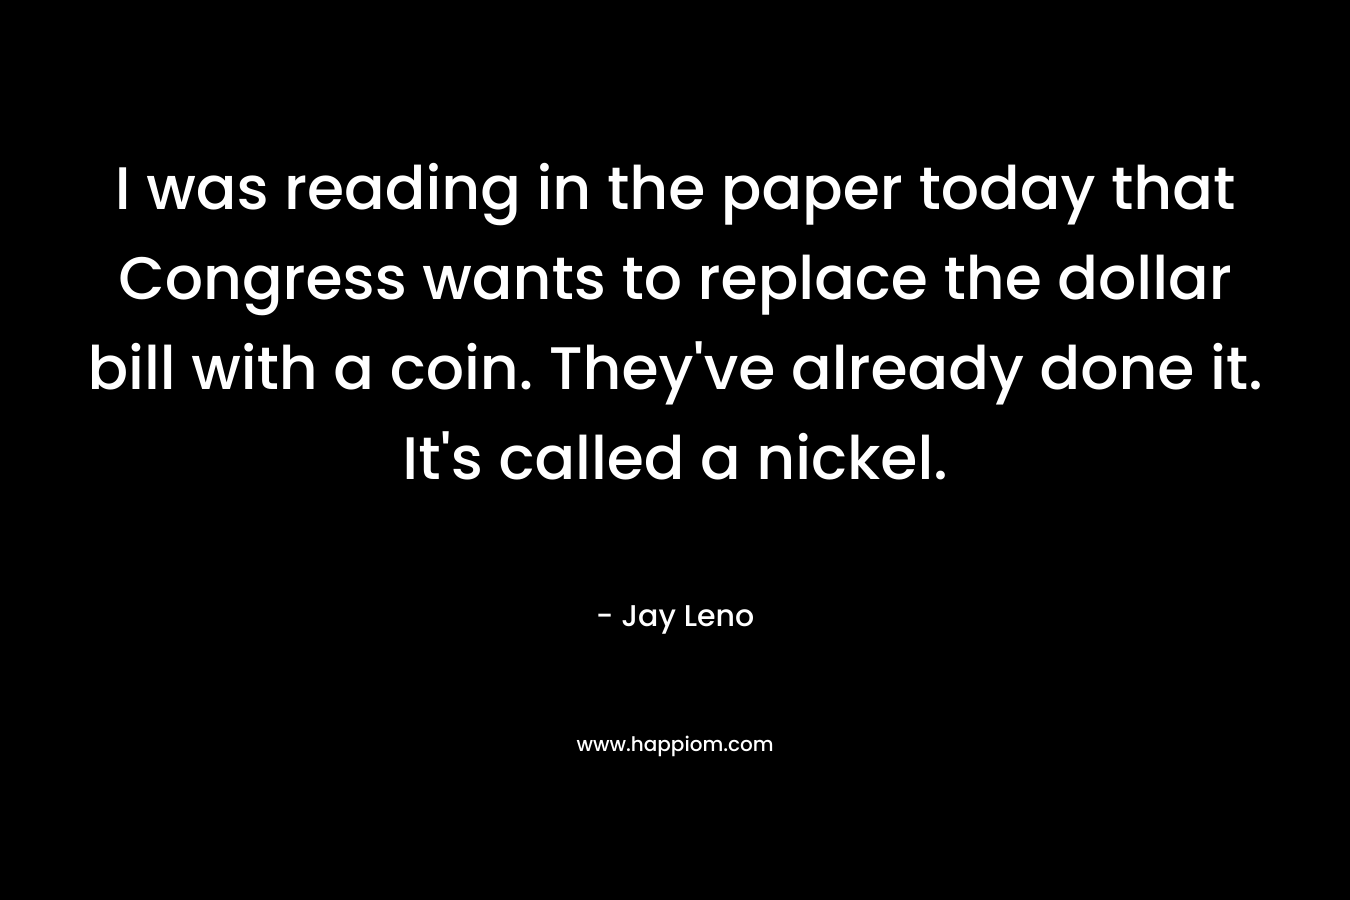 I was reading in the paper today that Congress wants to replace the dollar bill with a coin. They’ve already done it. It’s called a nickel. – Jay Leno